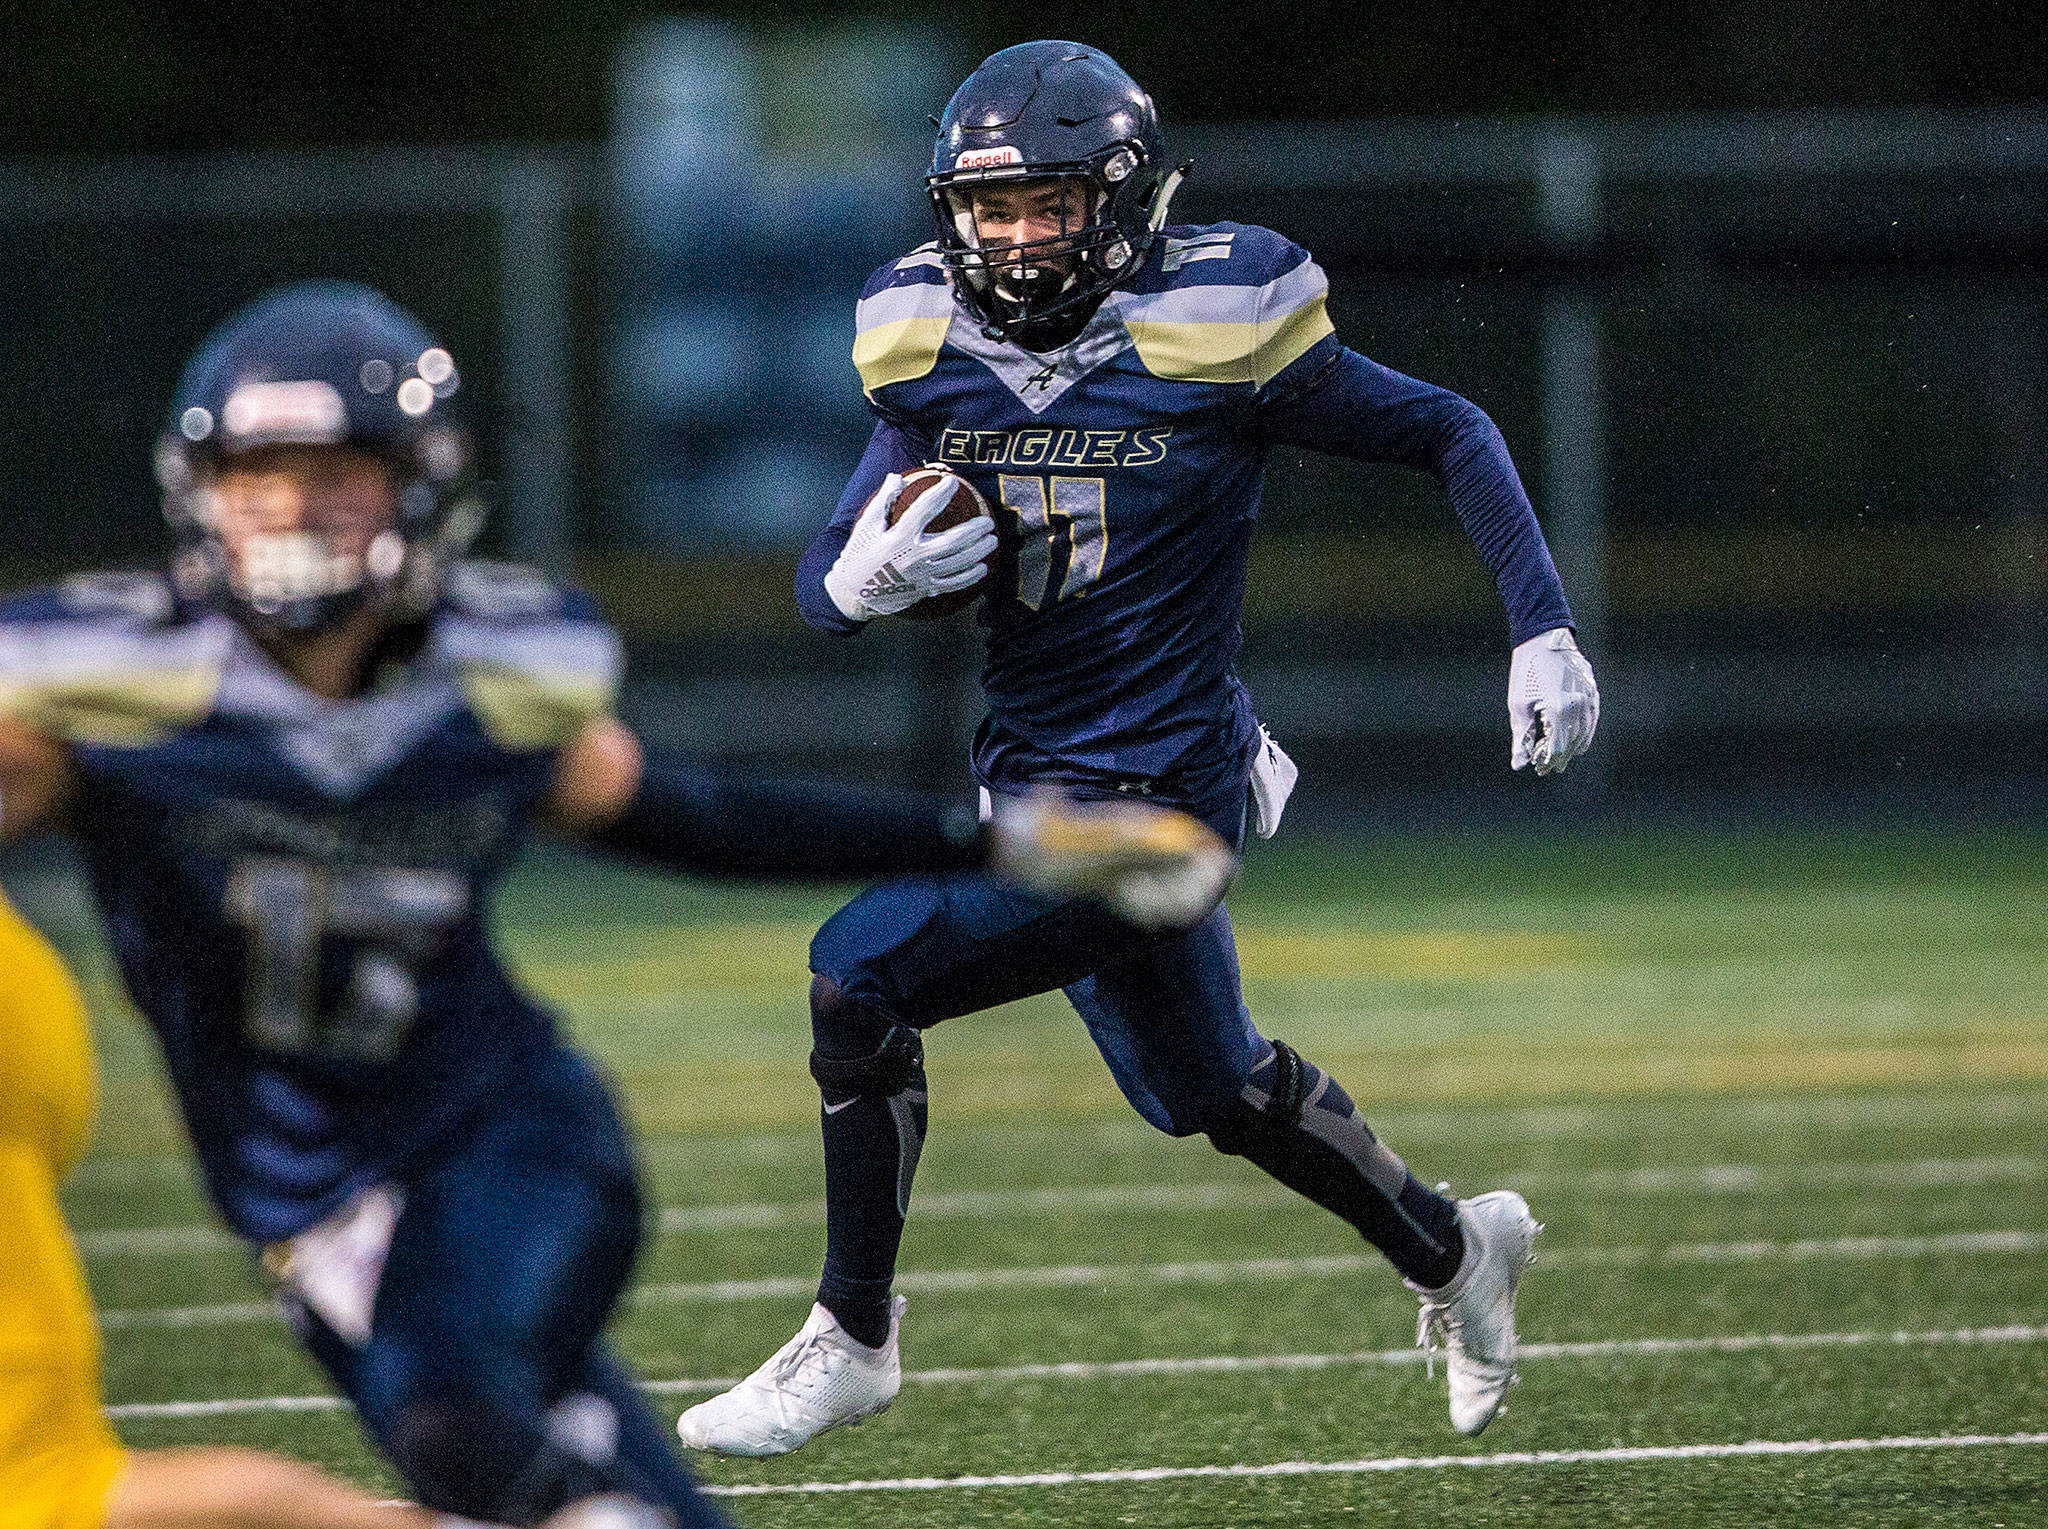 Arlington’s Daylin Pierce carries the ball during a game against Ferndale on Sept. 21, 2018, in Arlington. (Olivia Vanni / The Herald)